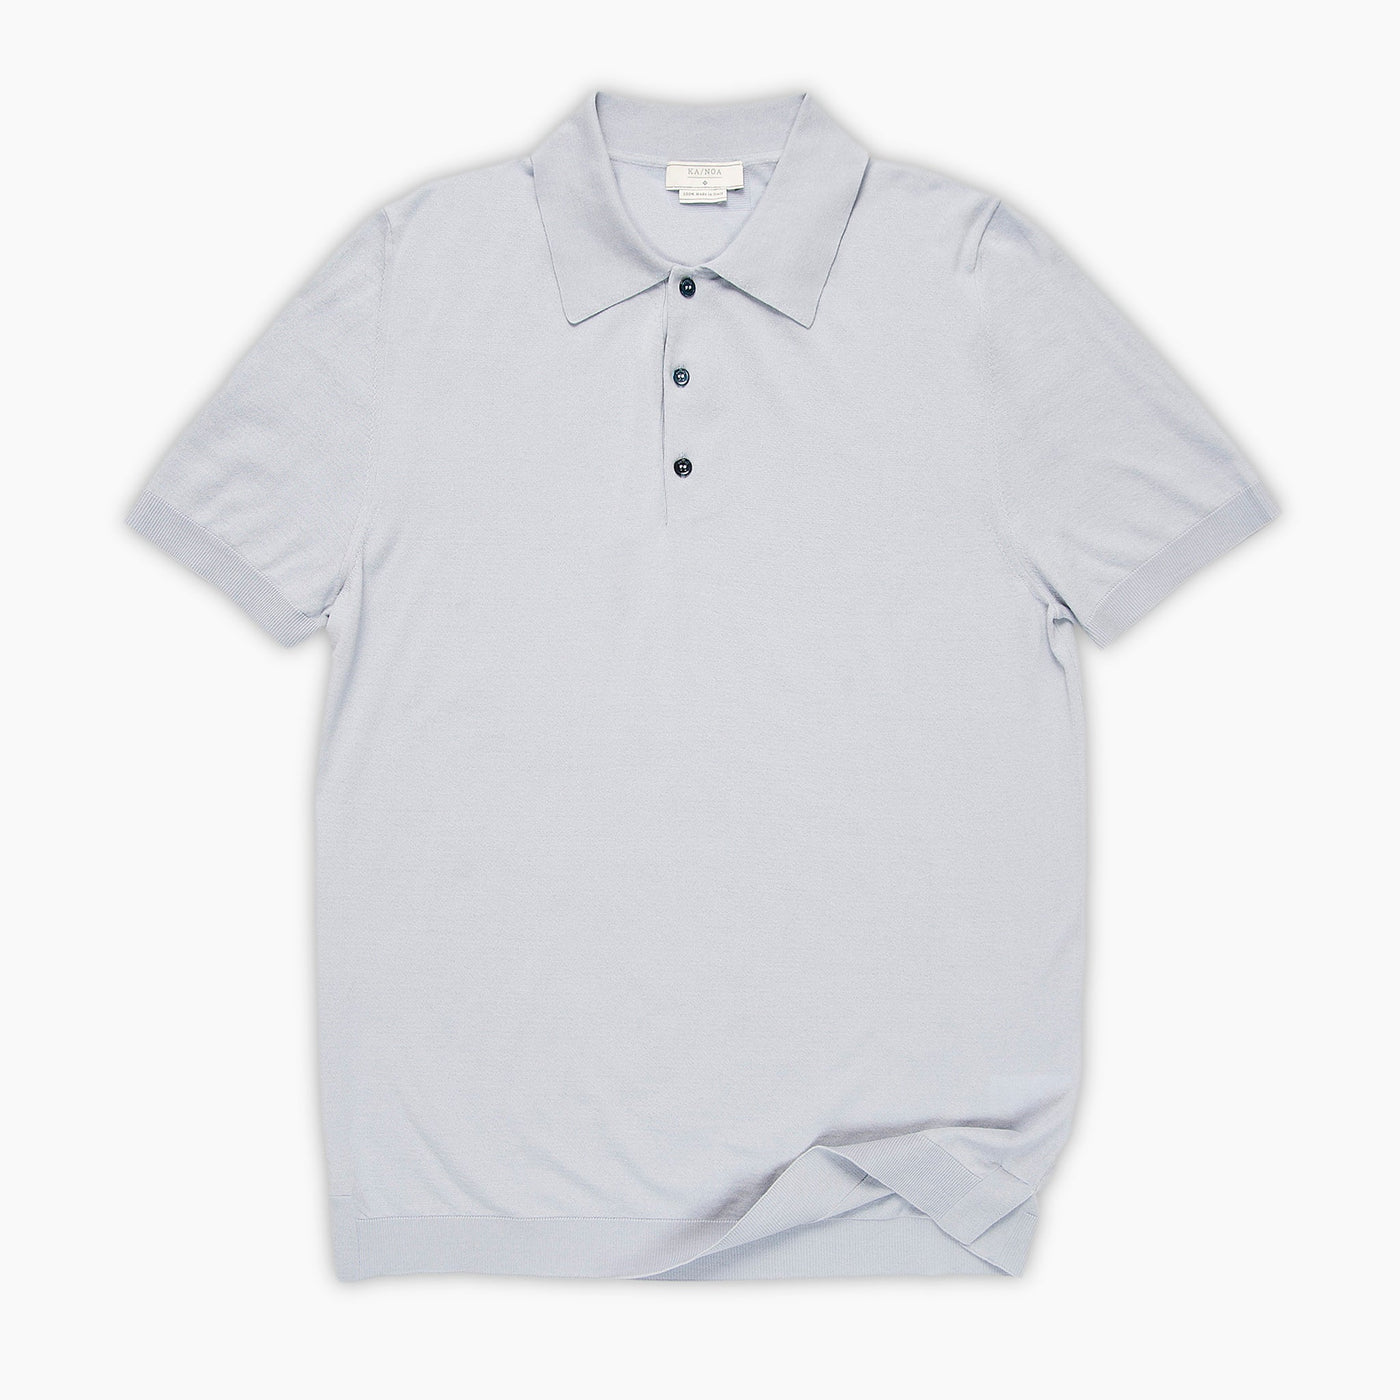 Florent short-sleeved knitted t-shirt in compact Egyptian cotton in sky grey